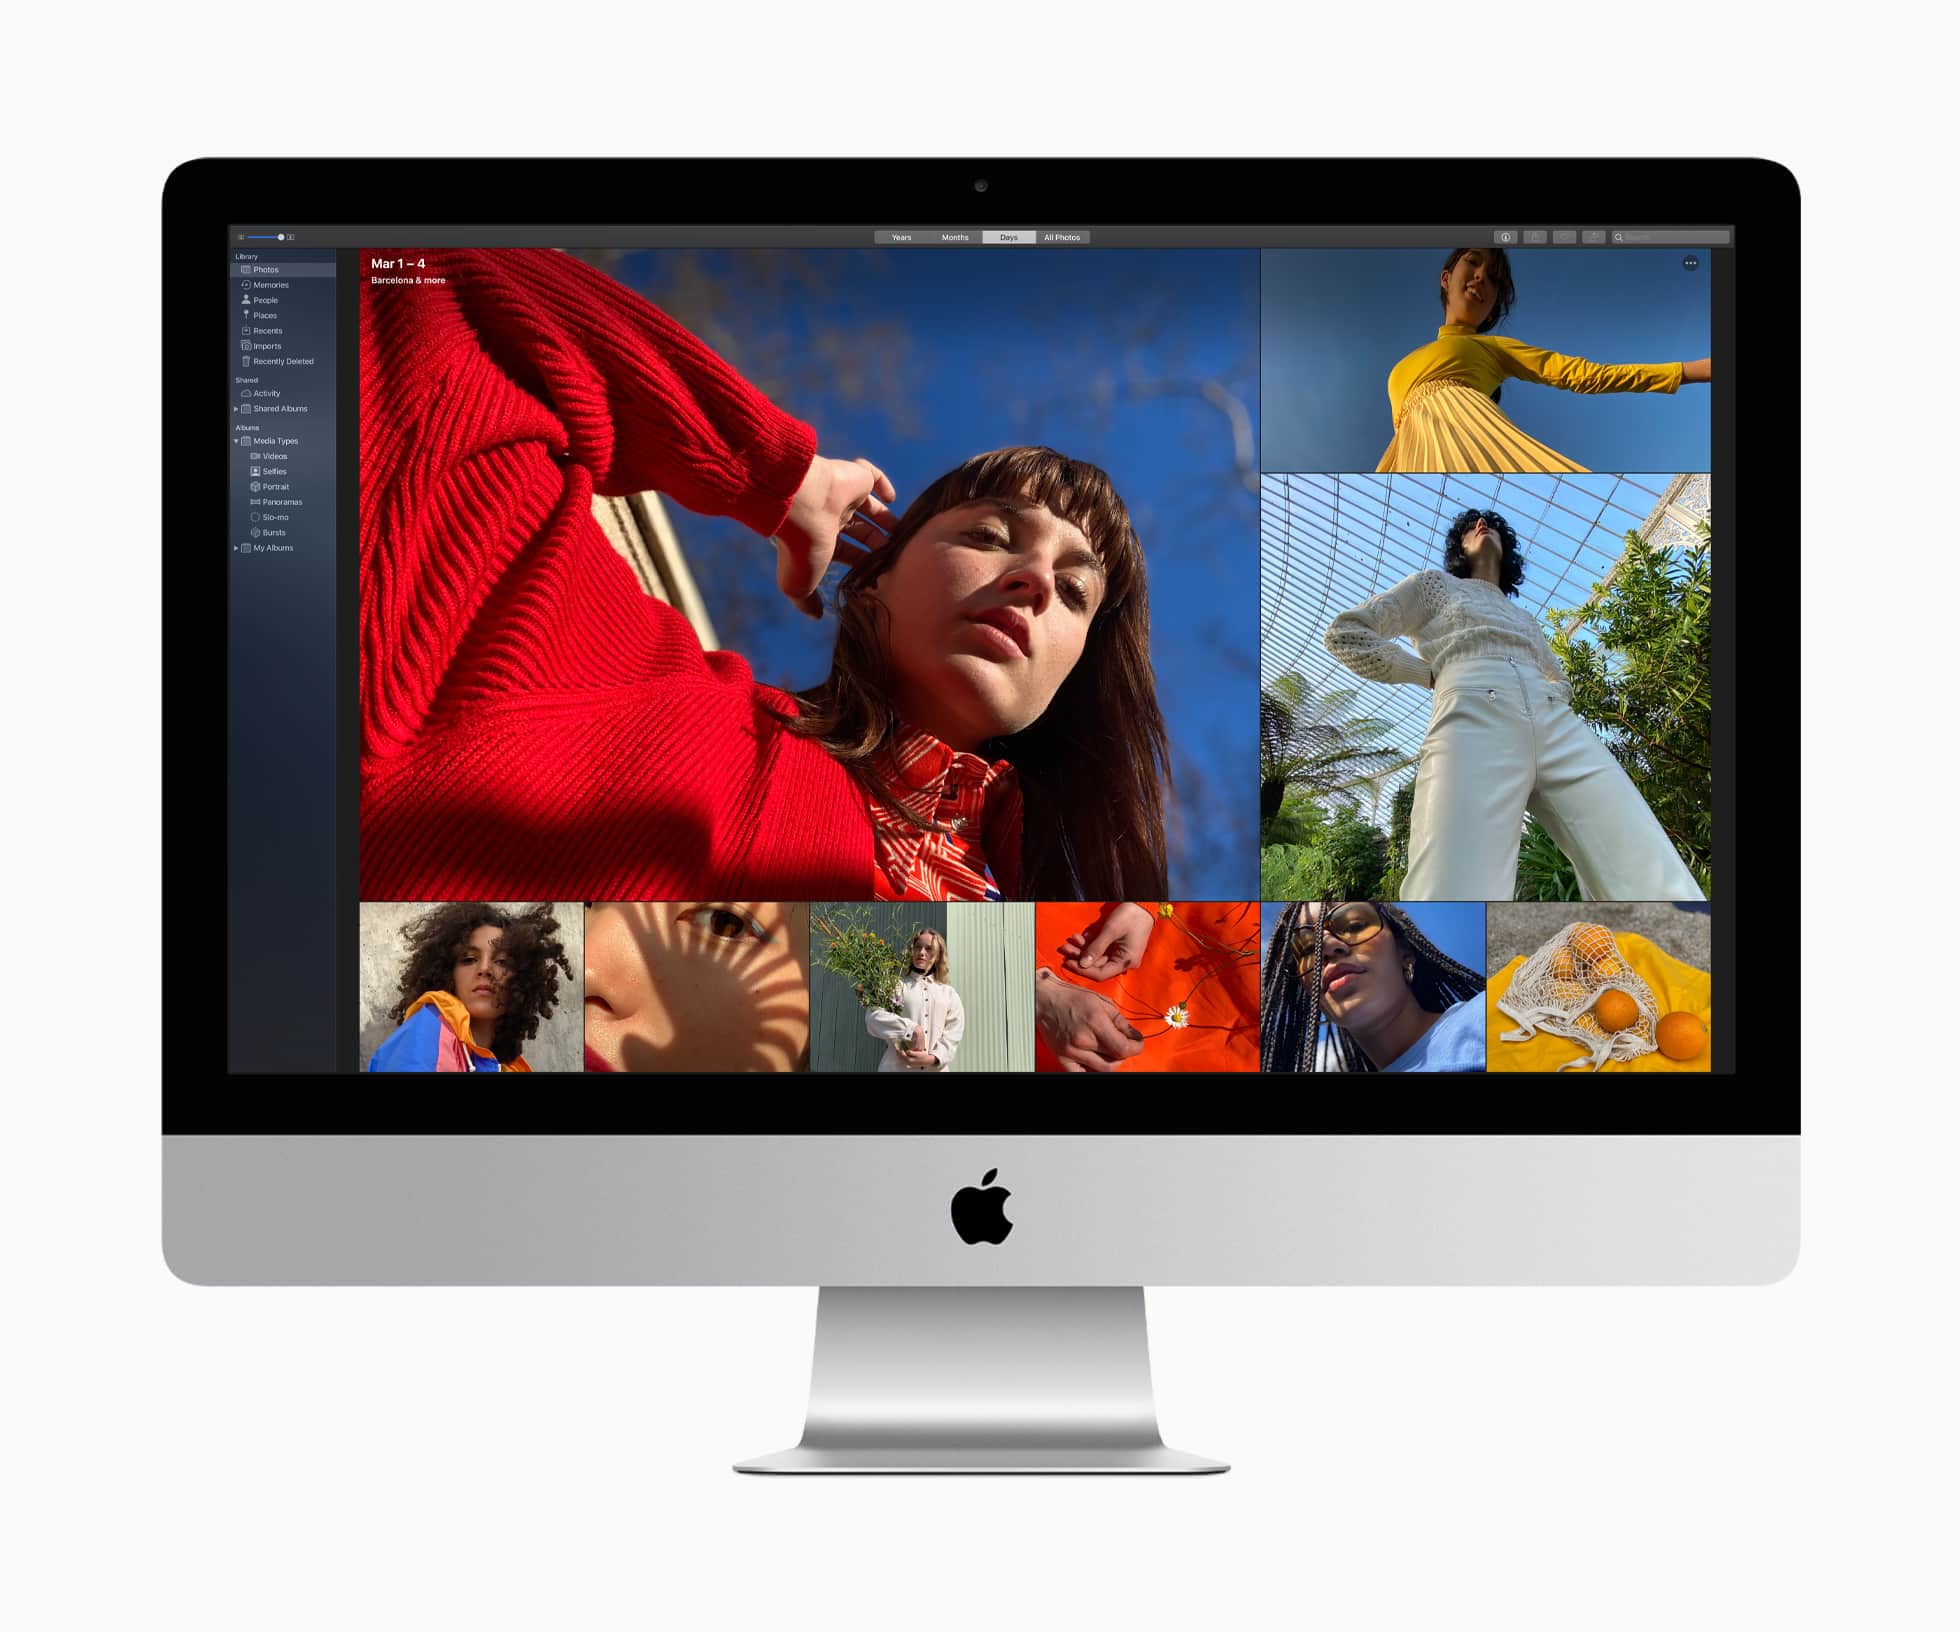 A nano-texture glass option brings an innovative matte finish to the iMac Retina 5K display for extremely low reflectivity while maintaining stellar image quality.